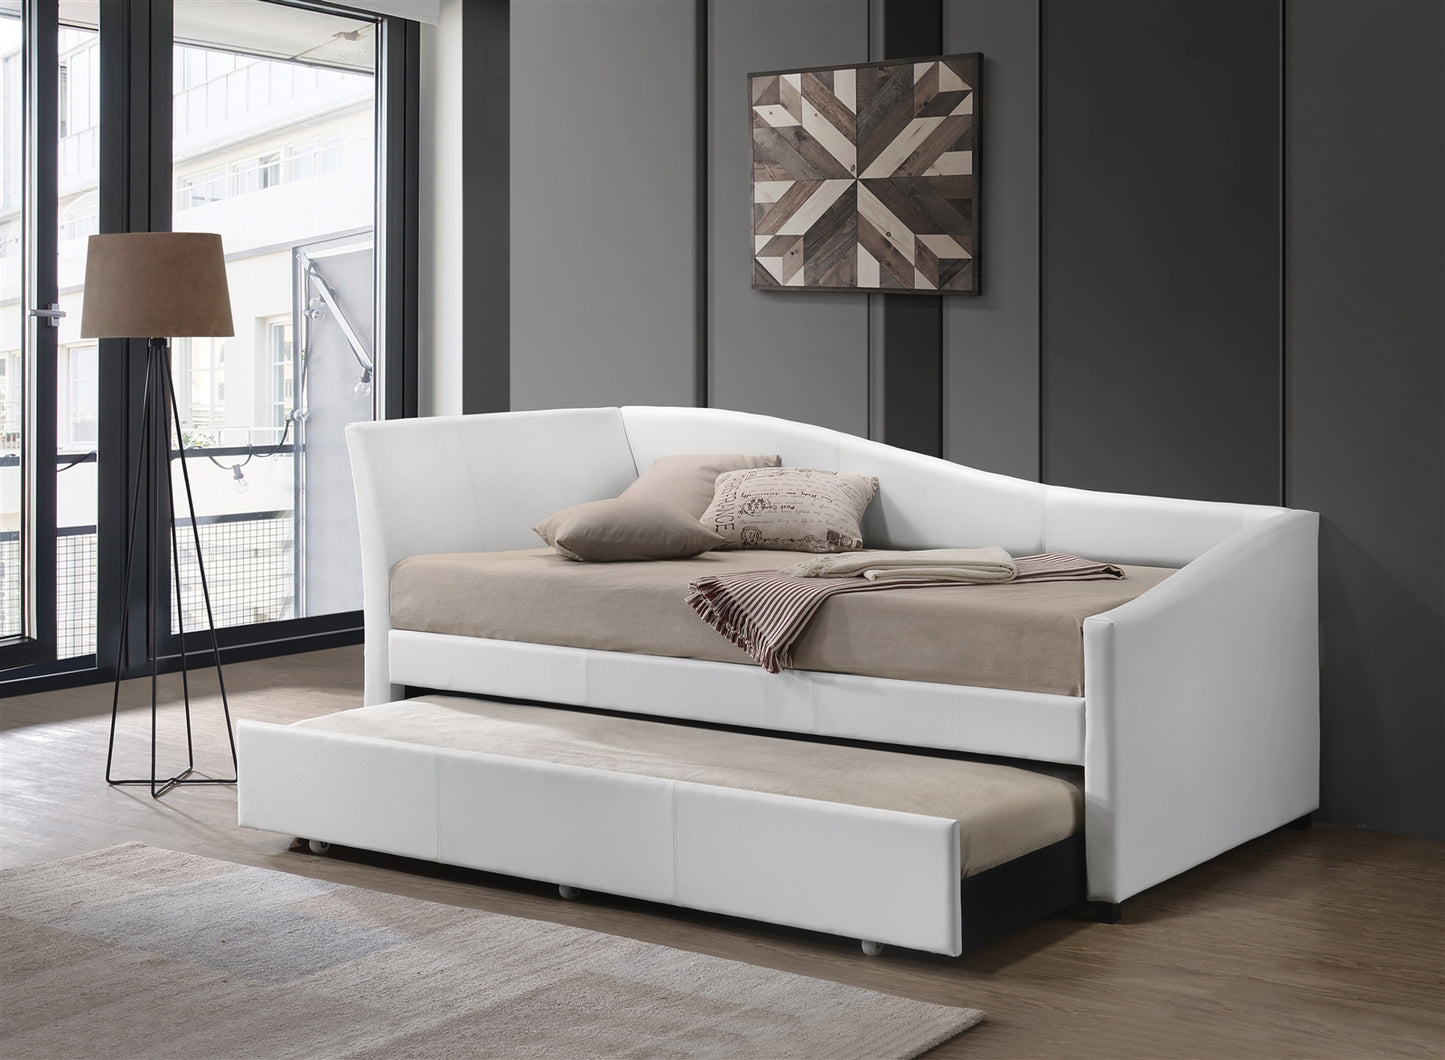 Jedda Contemporary White Daybed & Trundle Set